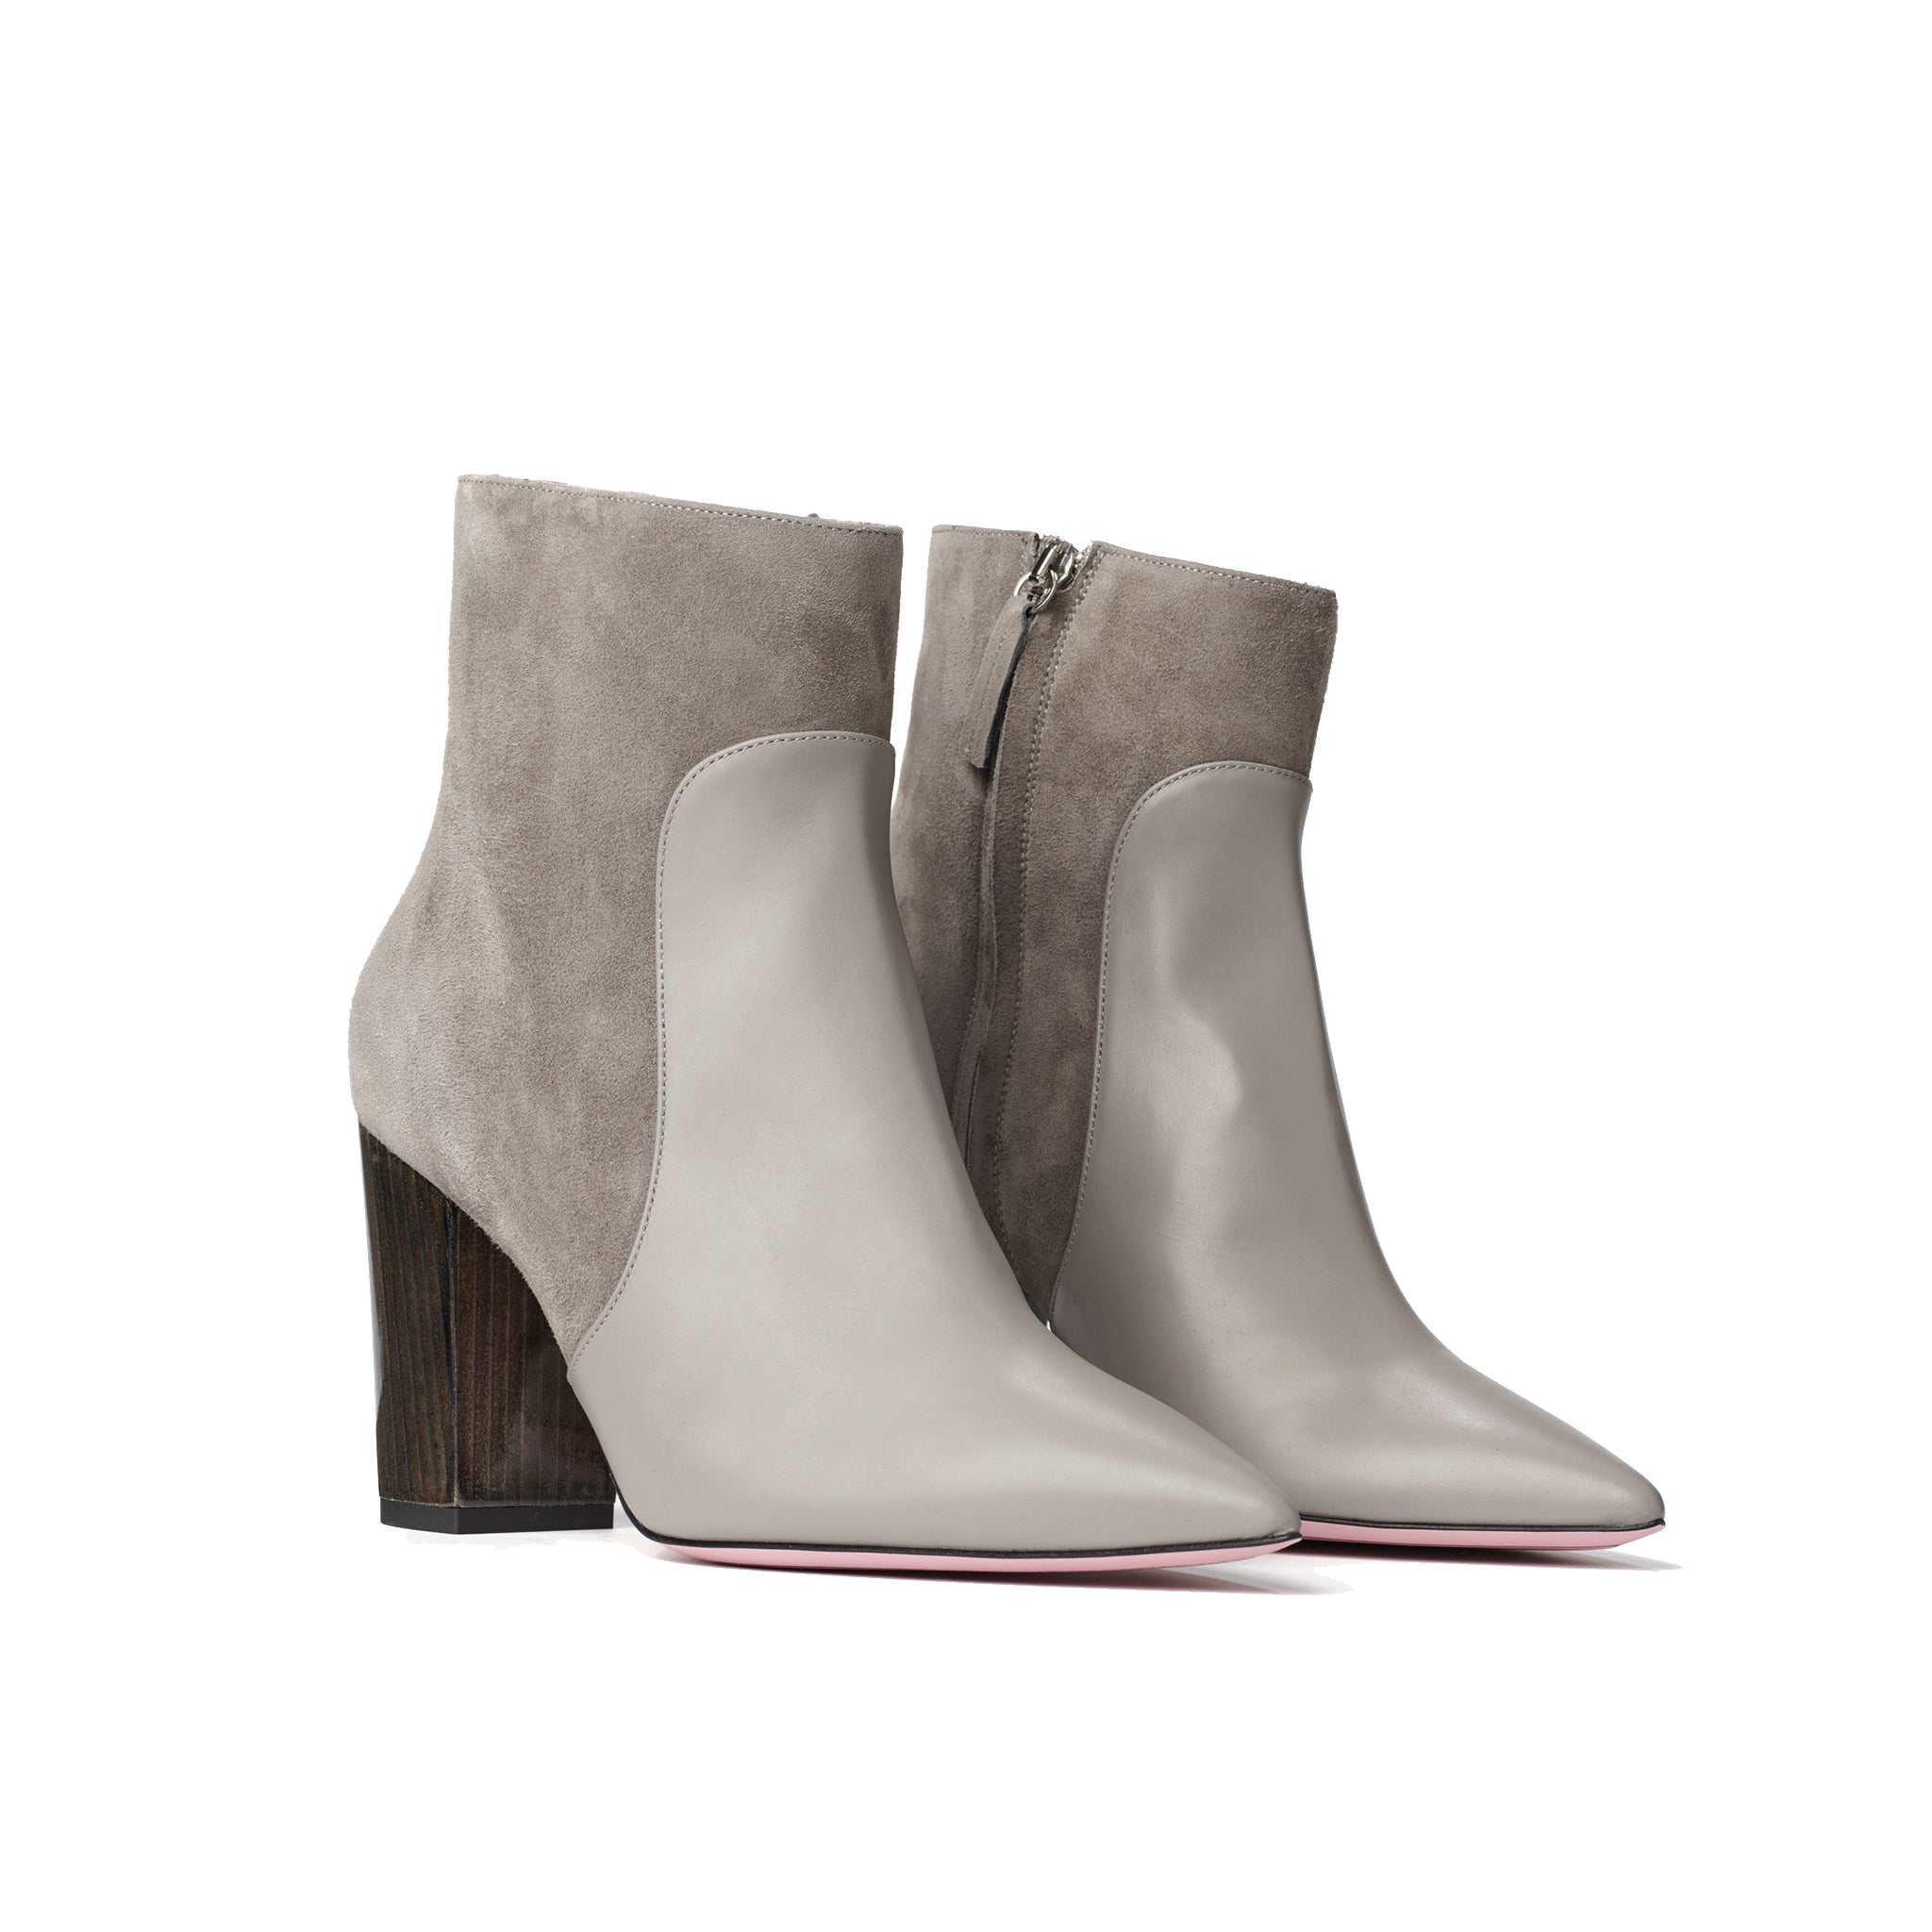 Phare Pointed block heel boot in cemento suede and leather made in Italy 3/4 view 